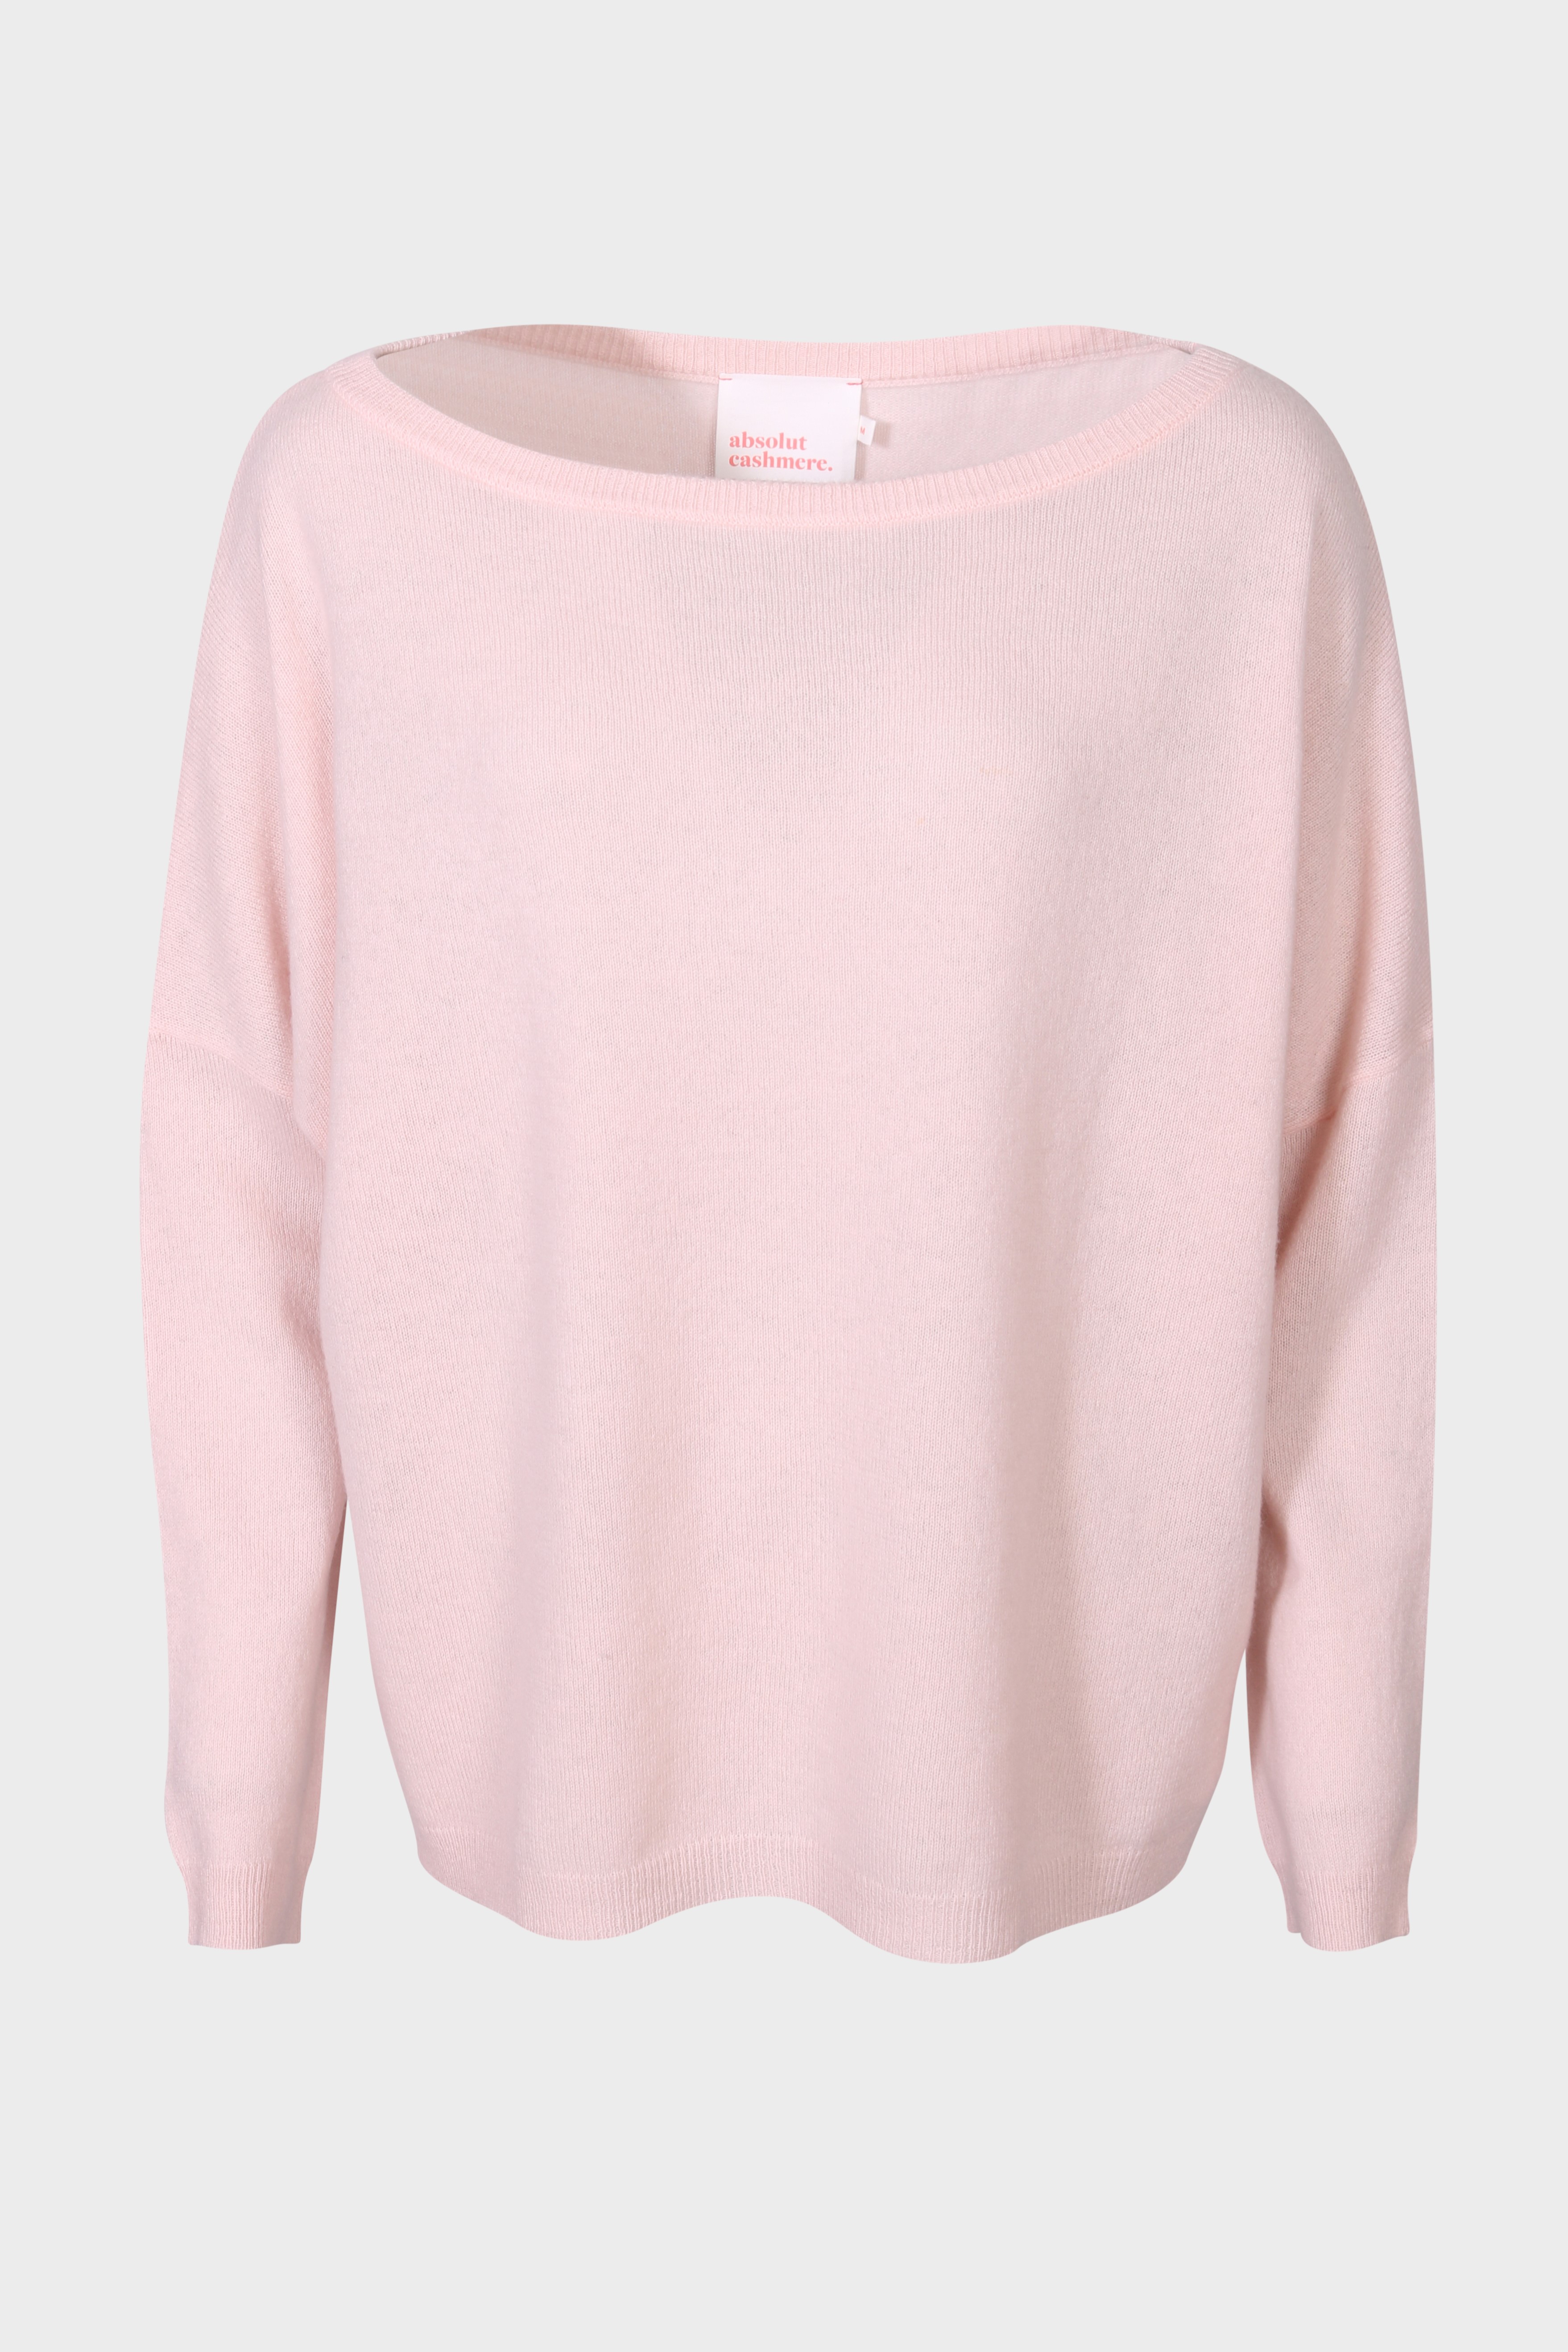 ABSOLUT CASHMERE Poncho Althea Ice Cream S